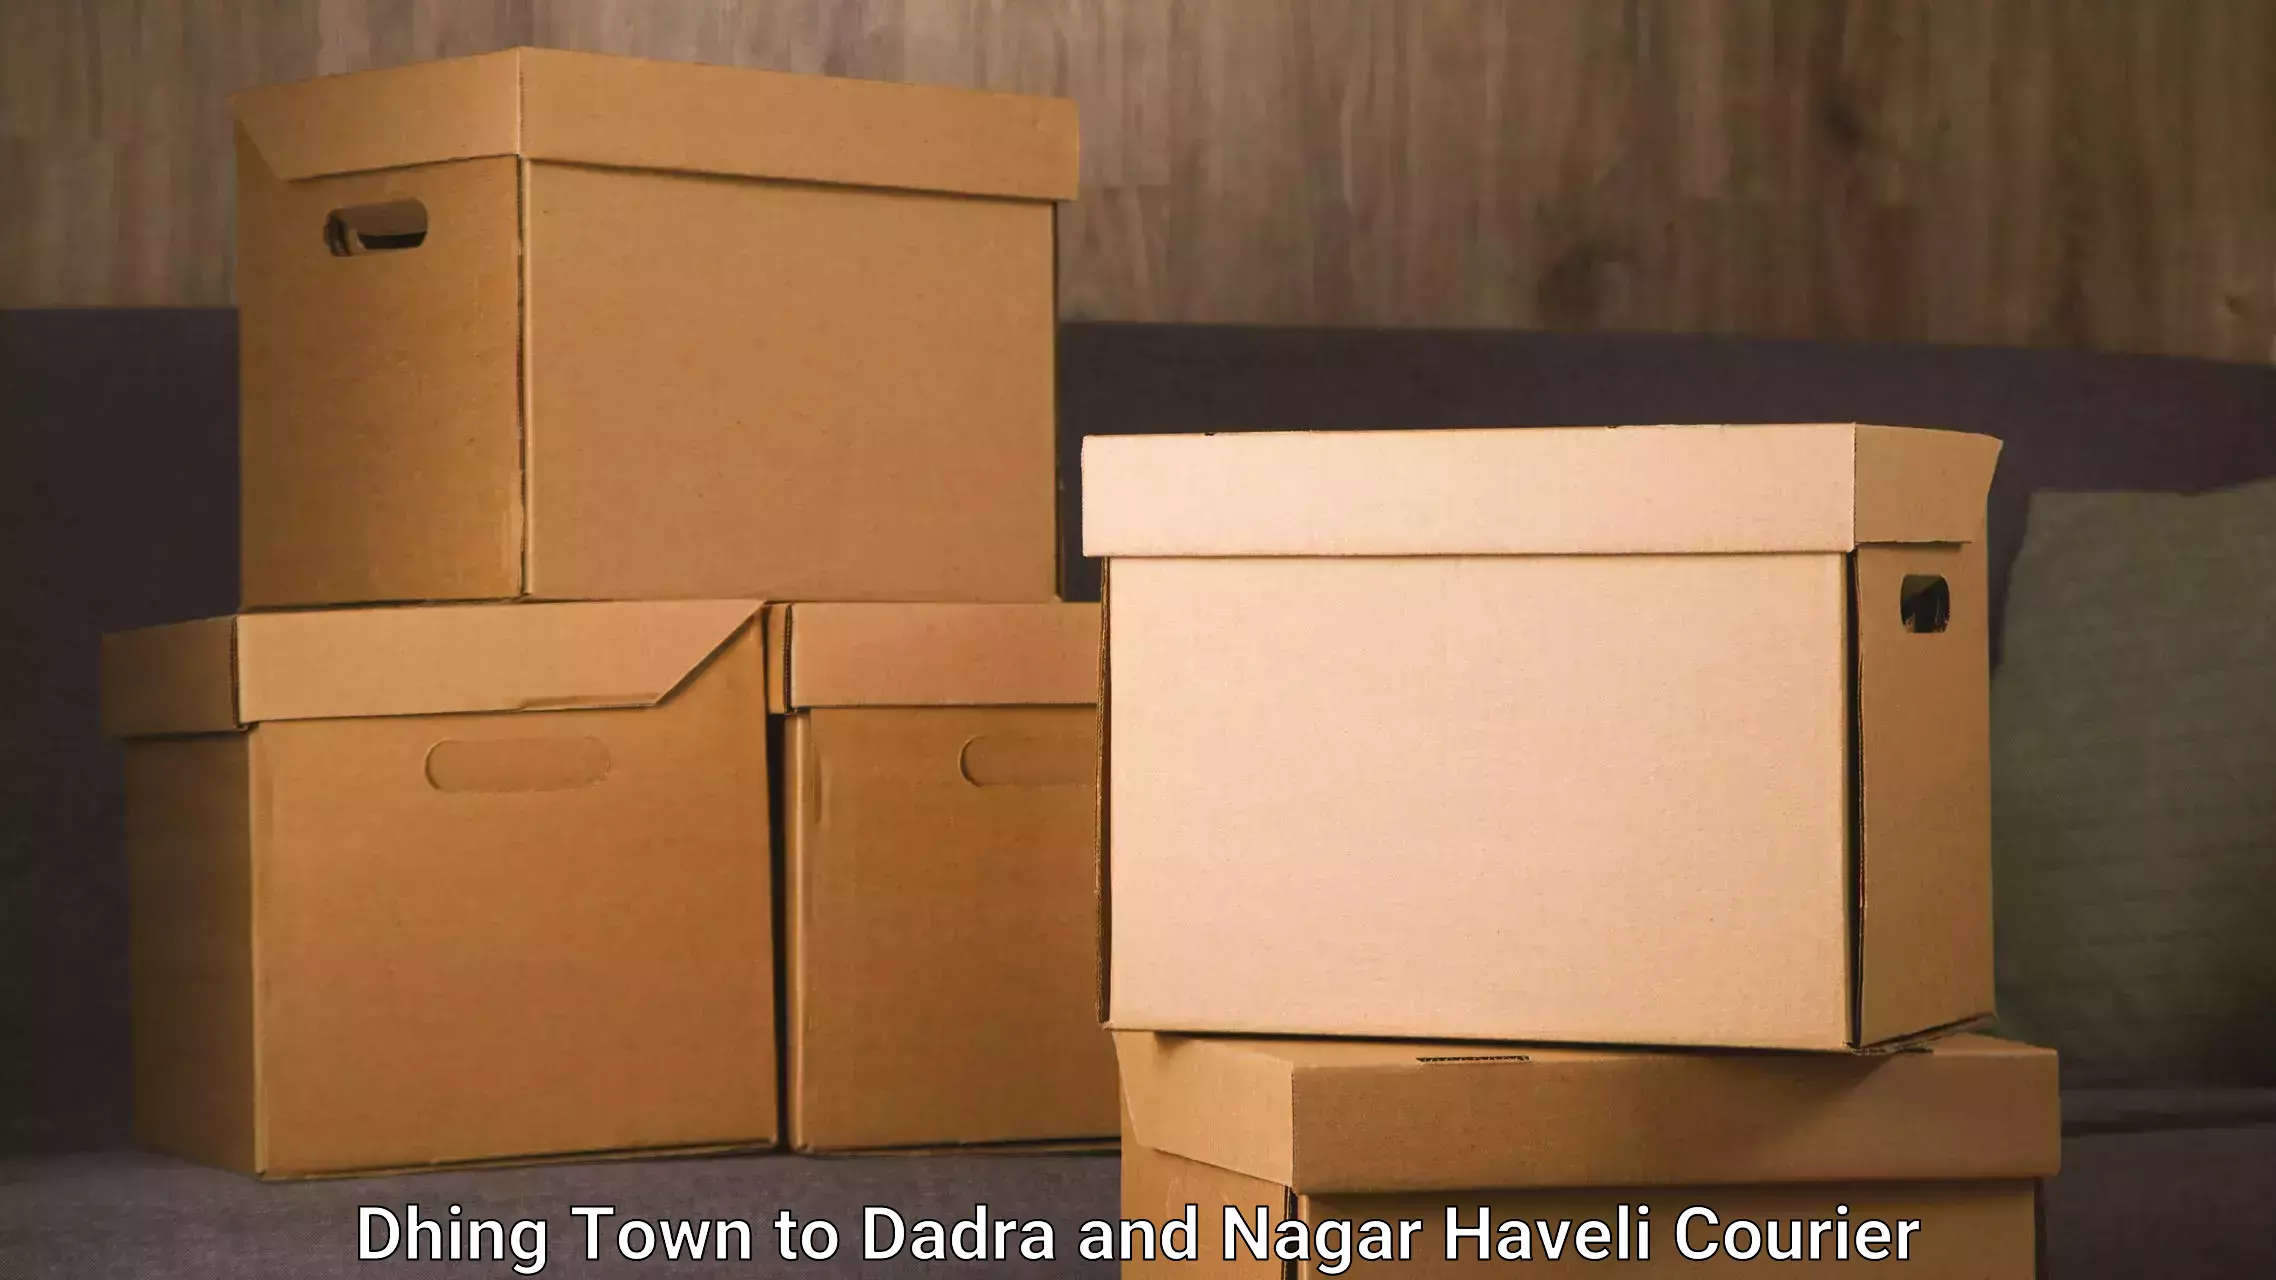 Nationwide shipping coverage Dhing Town to Dadra and Nagar Haveli